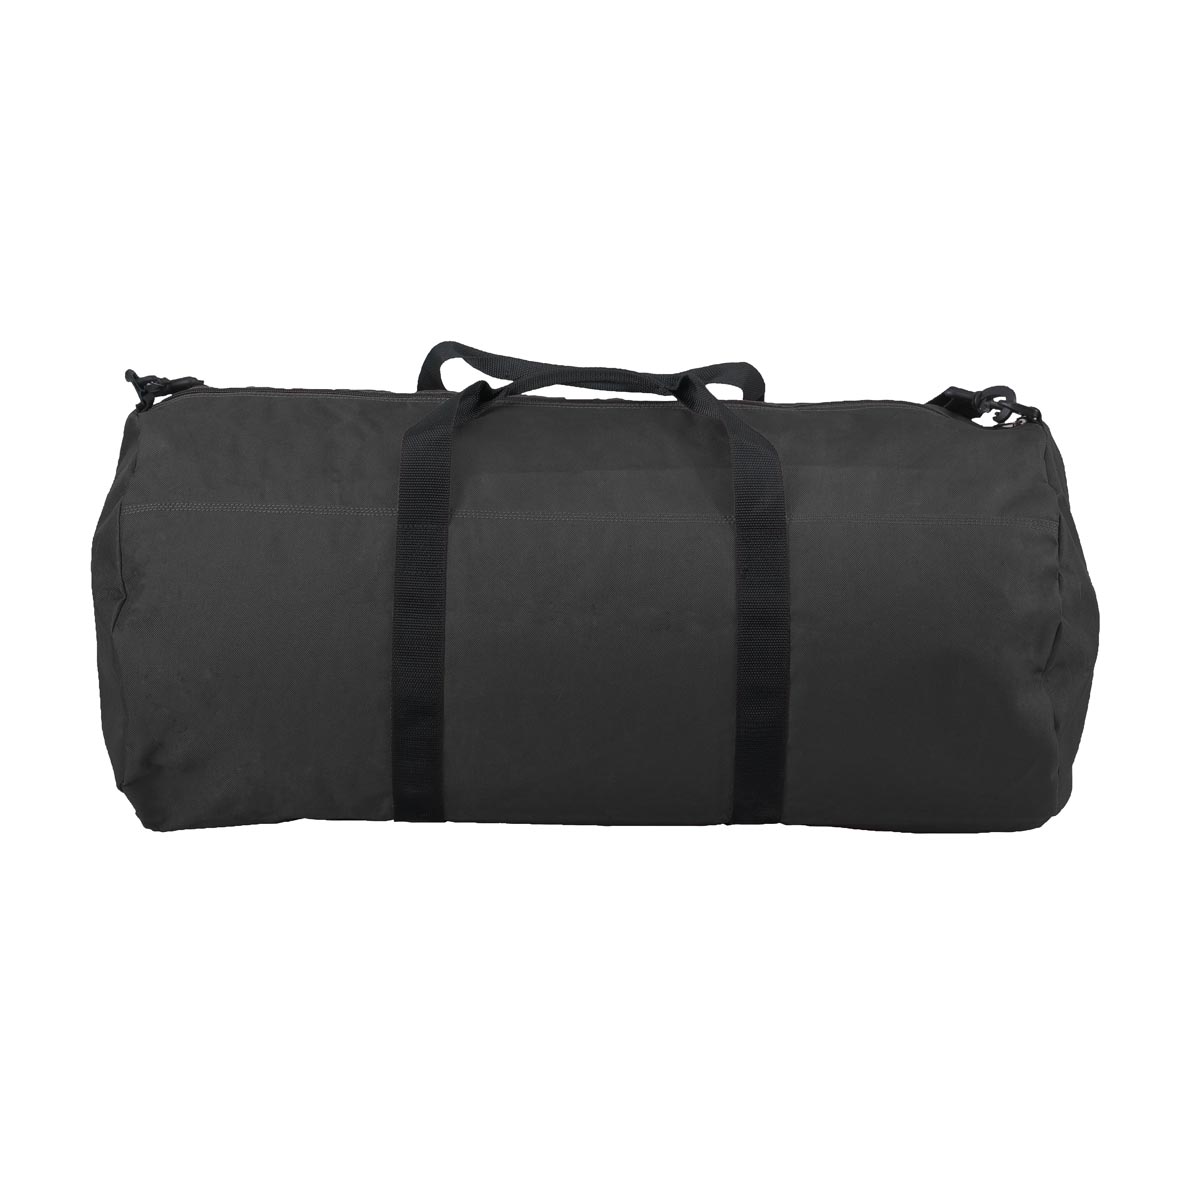 Carhartt Trade Series Xlarge Duffel with Utility Pouch